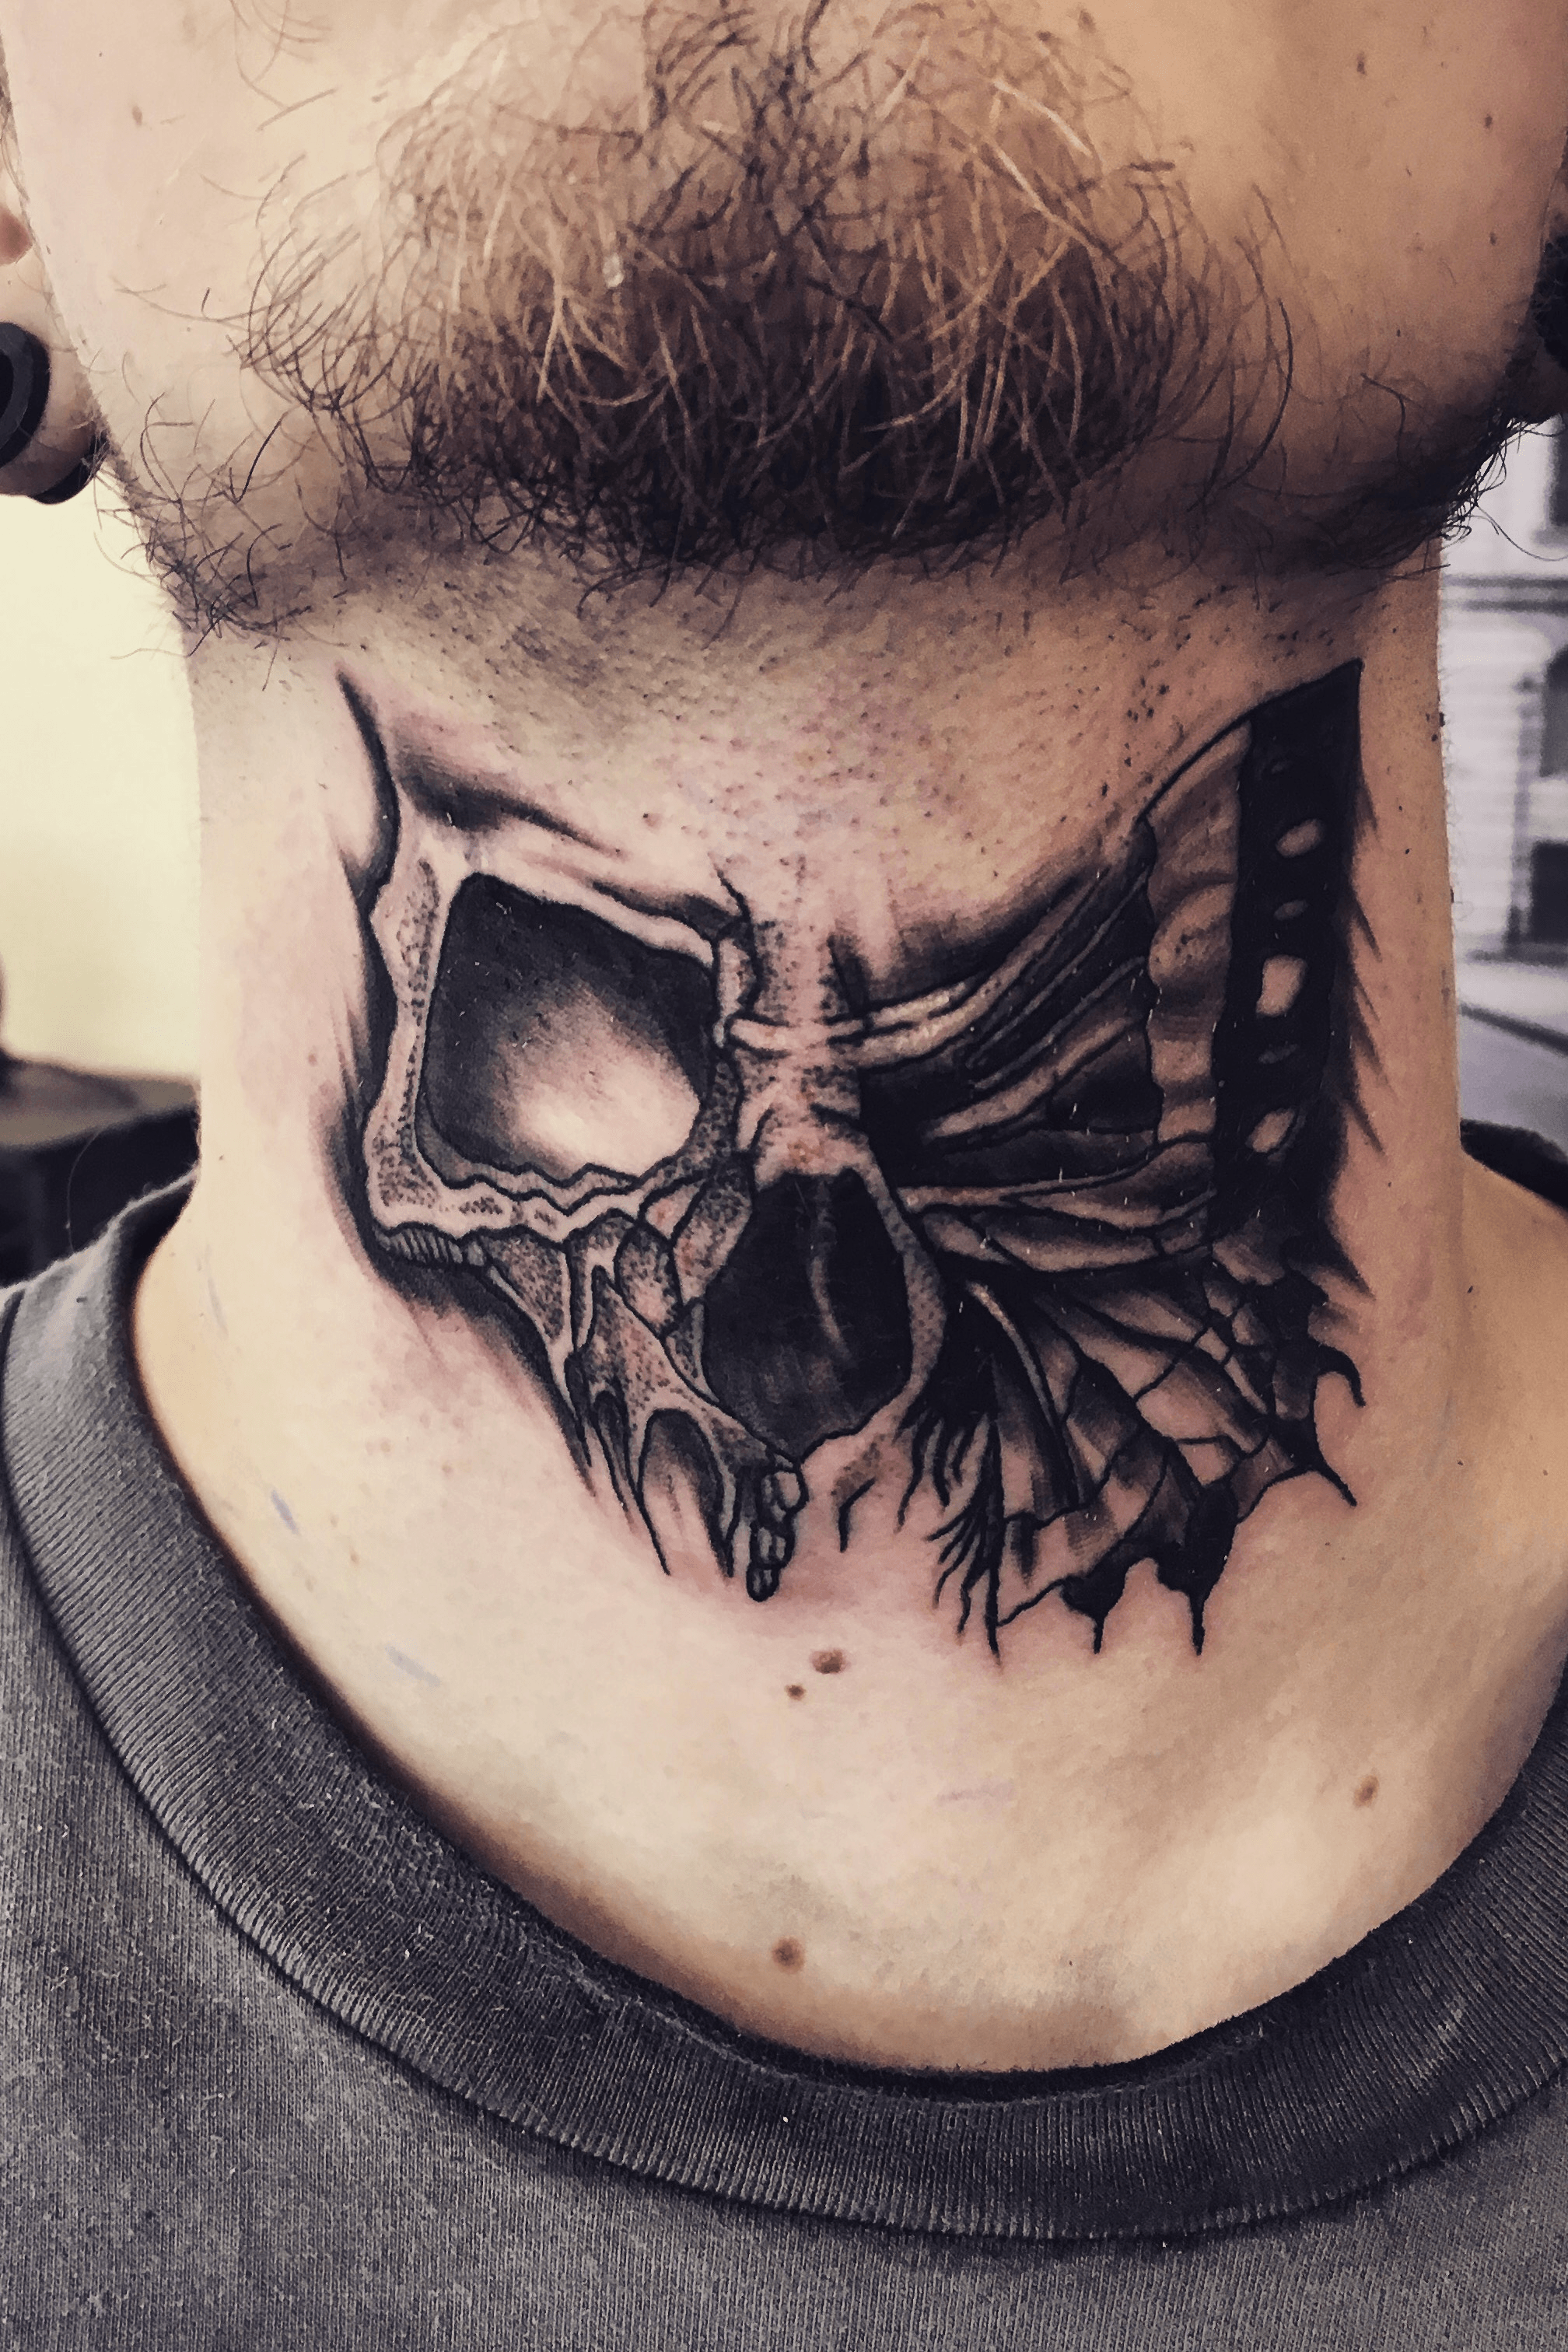 Butterfly Skull Tattoos A Striking Fusion of Life and Death  Art and  Design